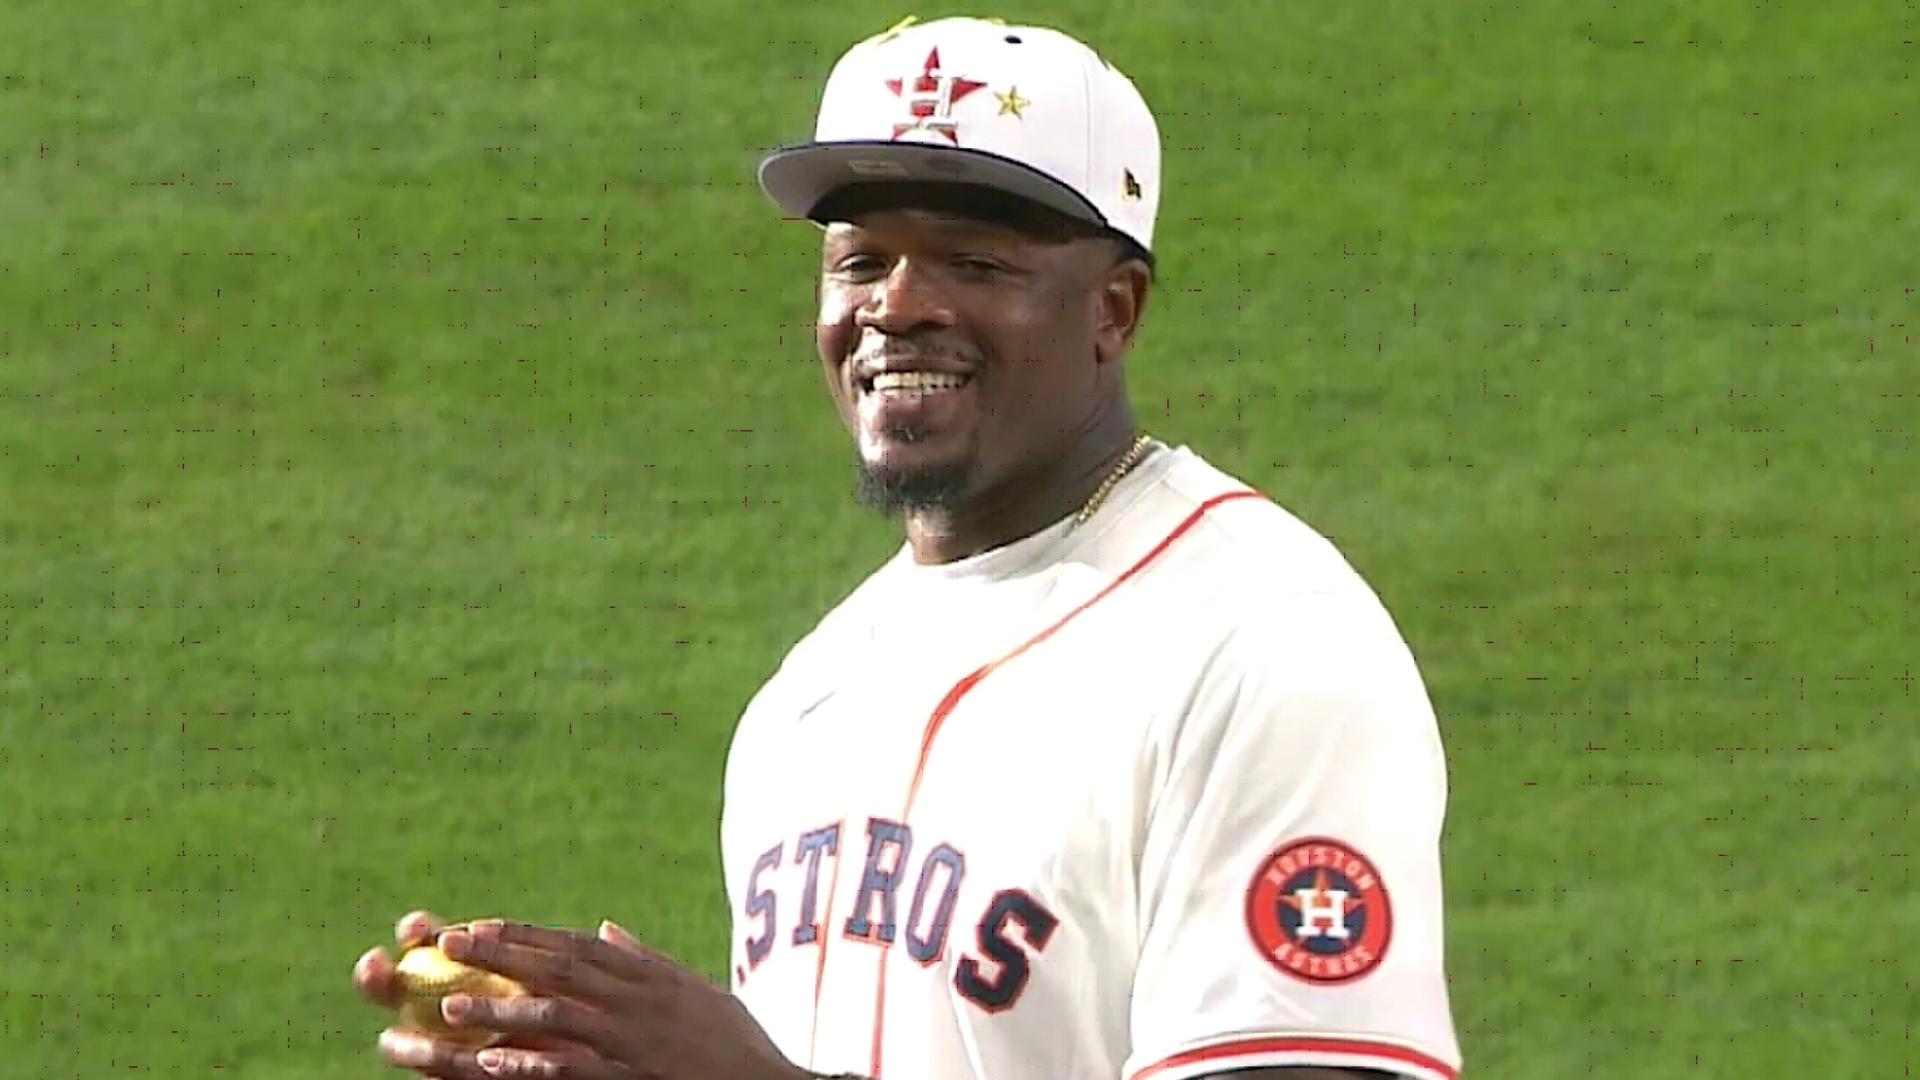 The Astros also honored Johnson with a pregame ceremony before the game ahead of his induction into the Pro Football Hall of Fame.